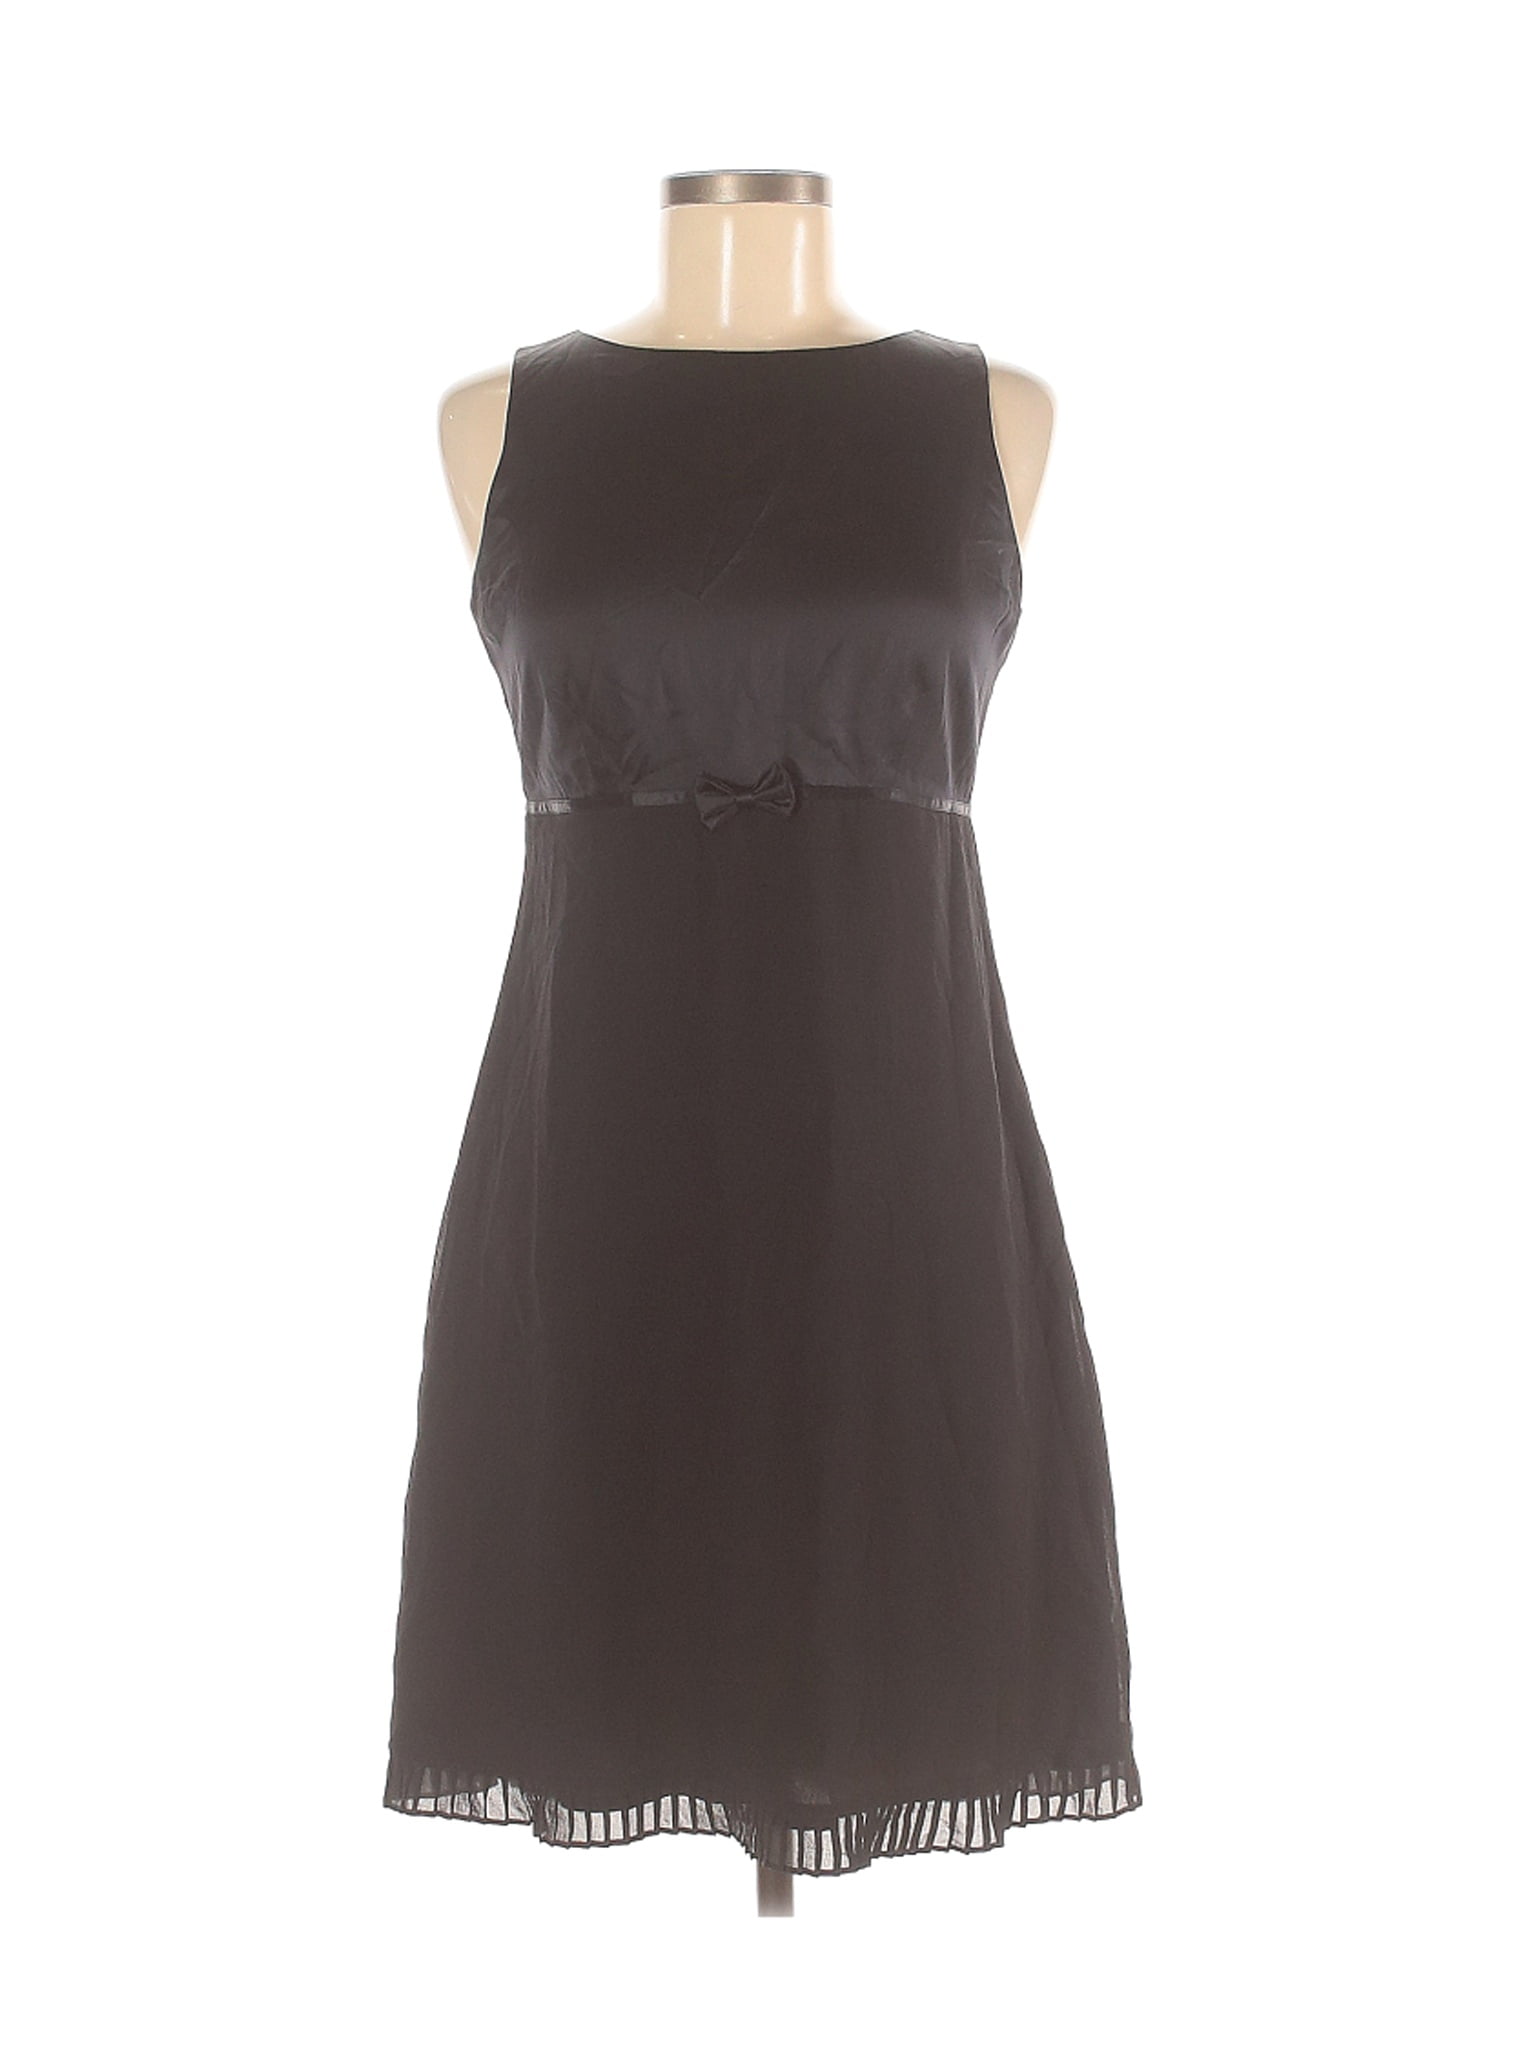 Laura Ashley - Pre-Owned Laura Ashley Women's Size 6 Cocktail Dress ...